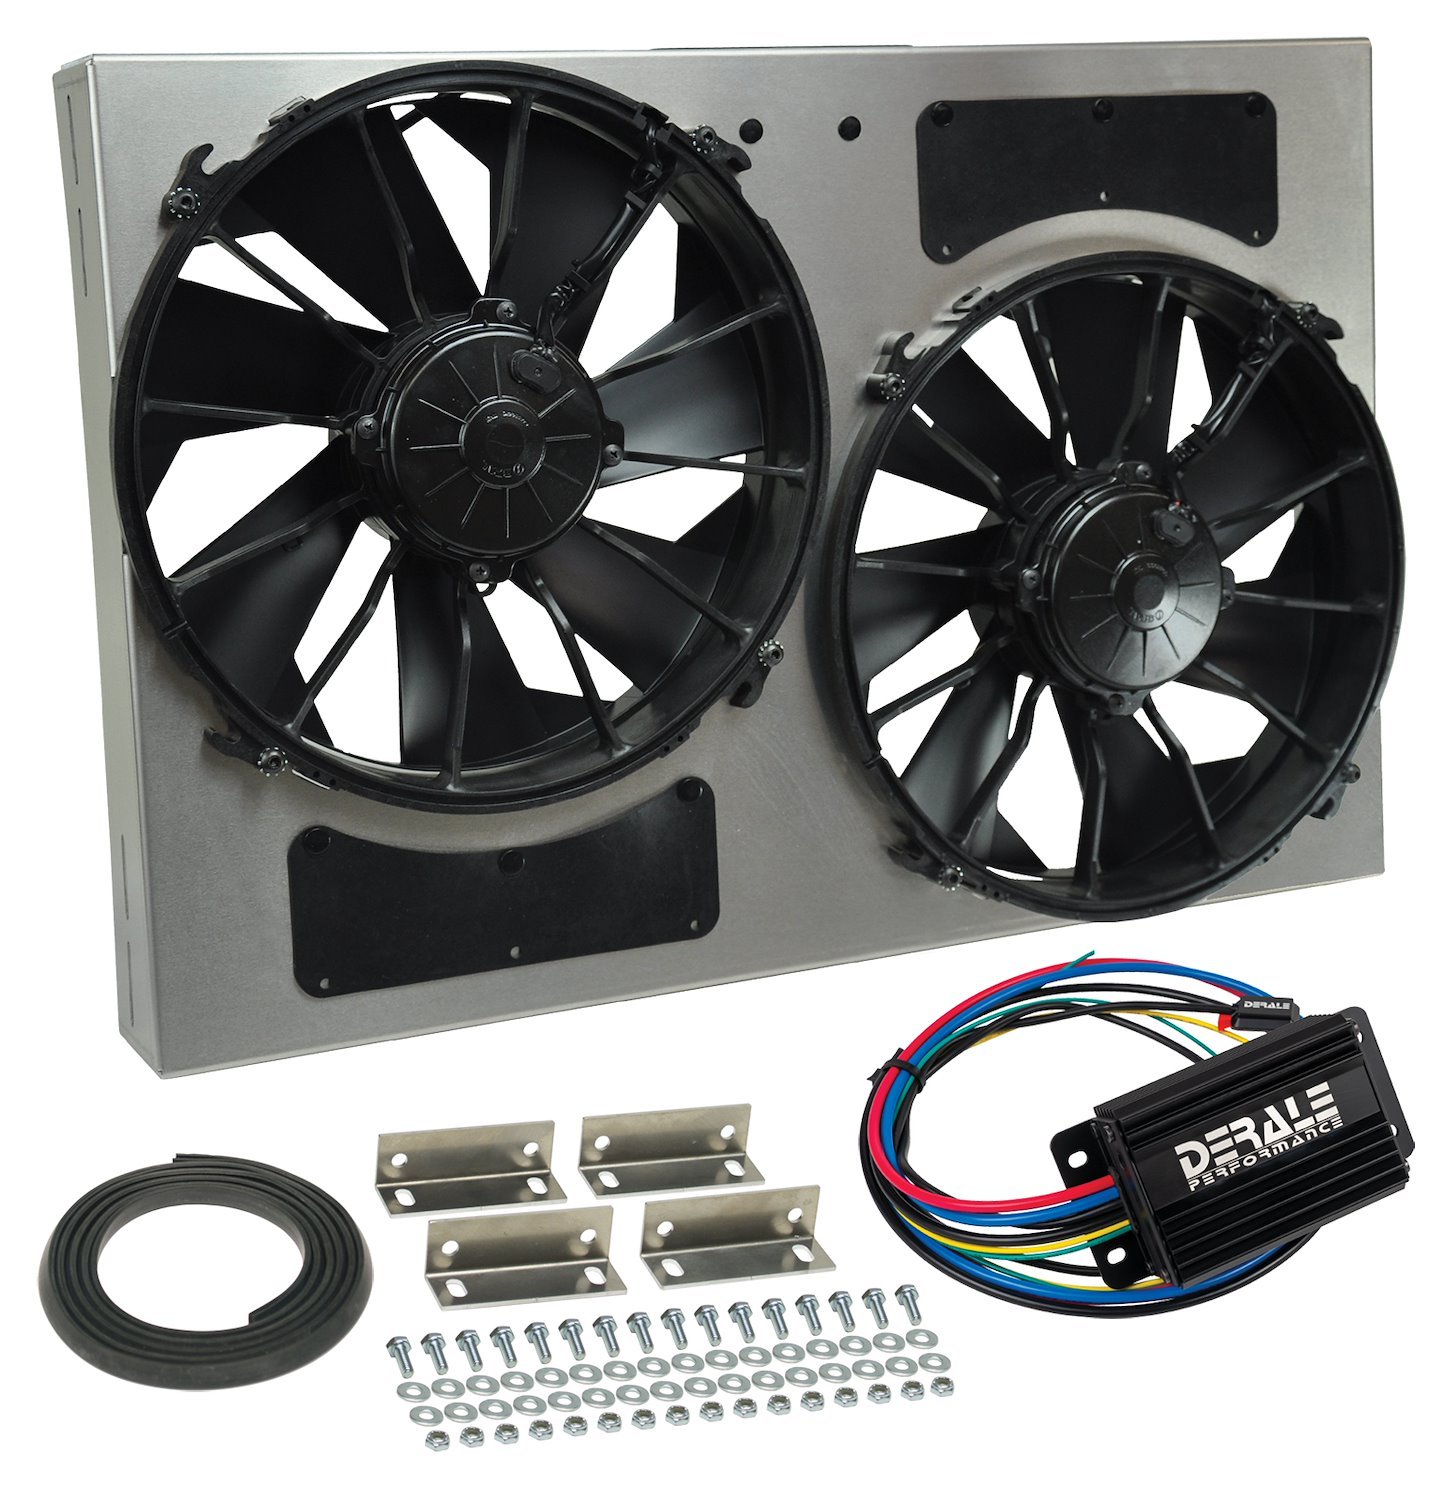 High-Output Dual Fan Assembly With PWM Controller